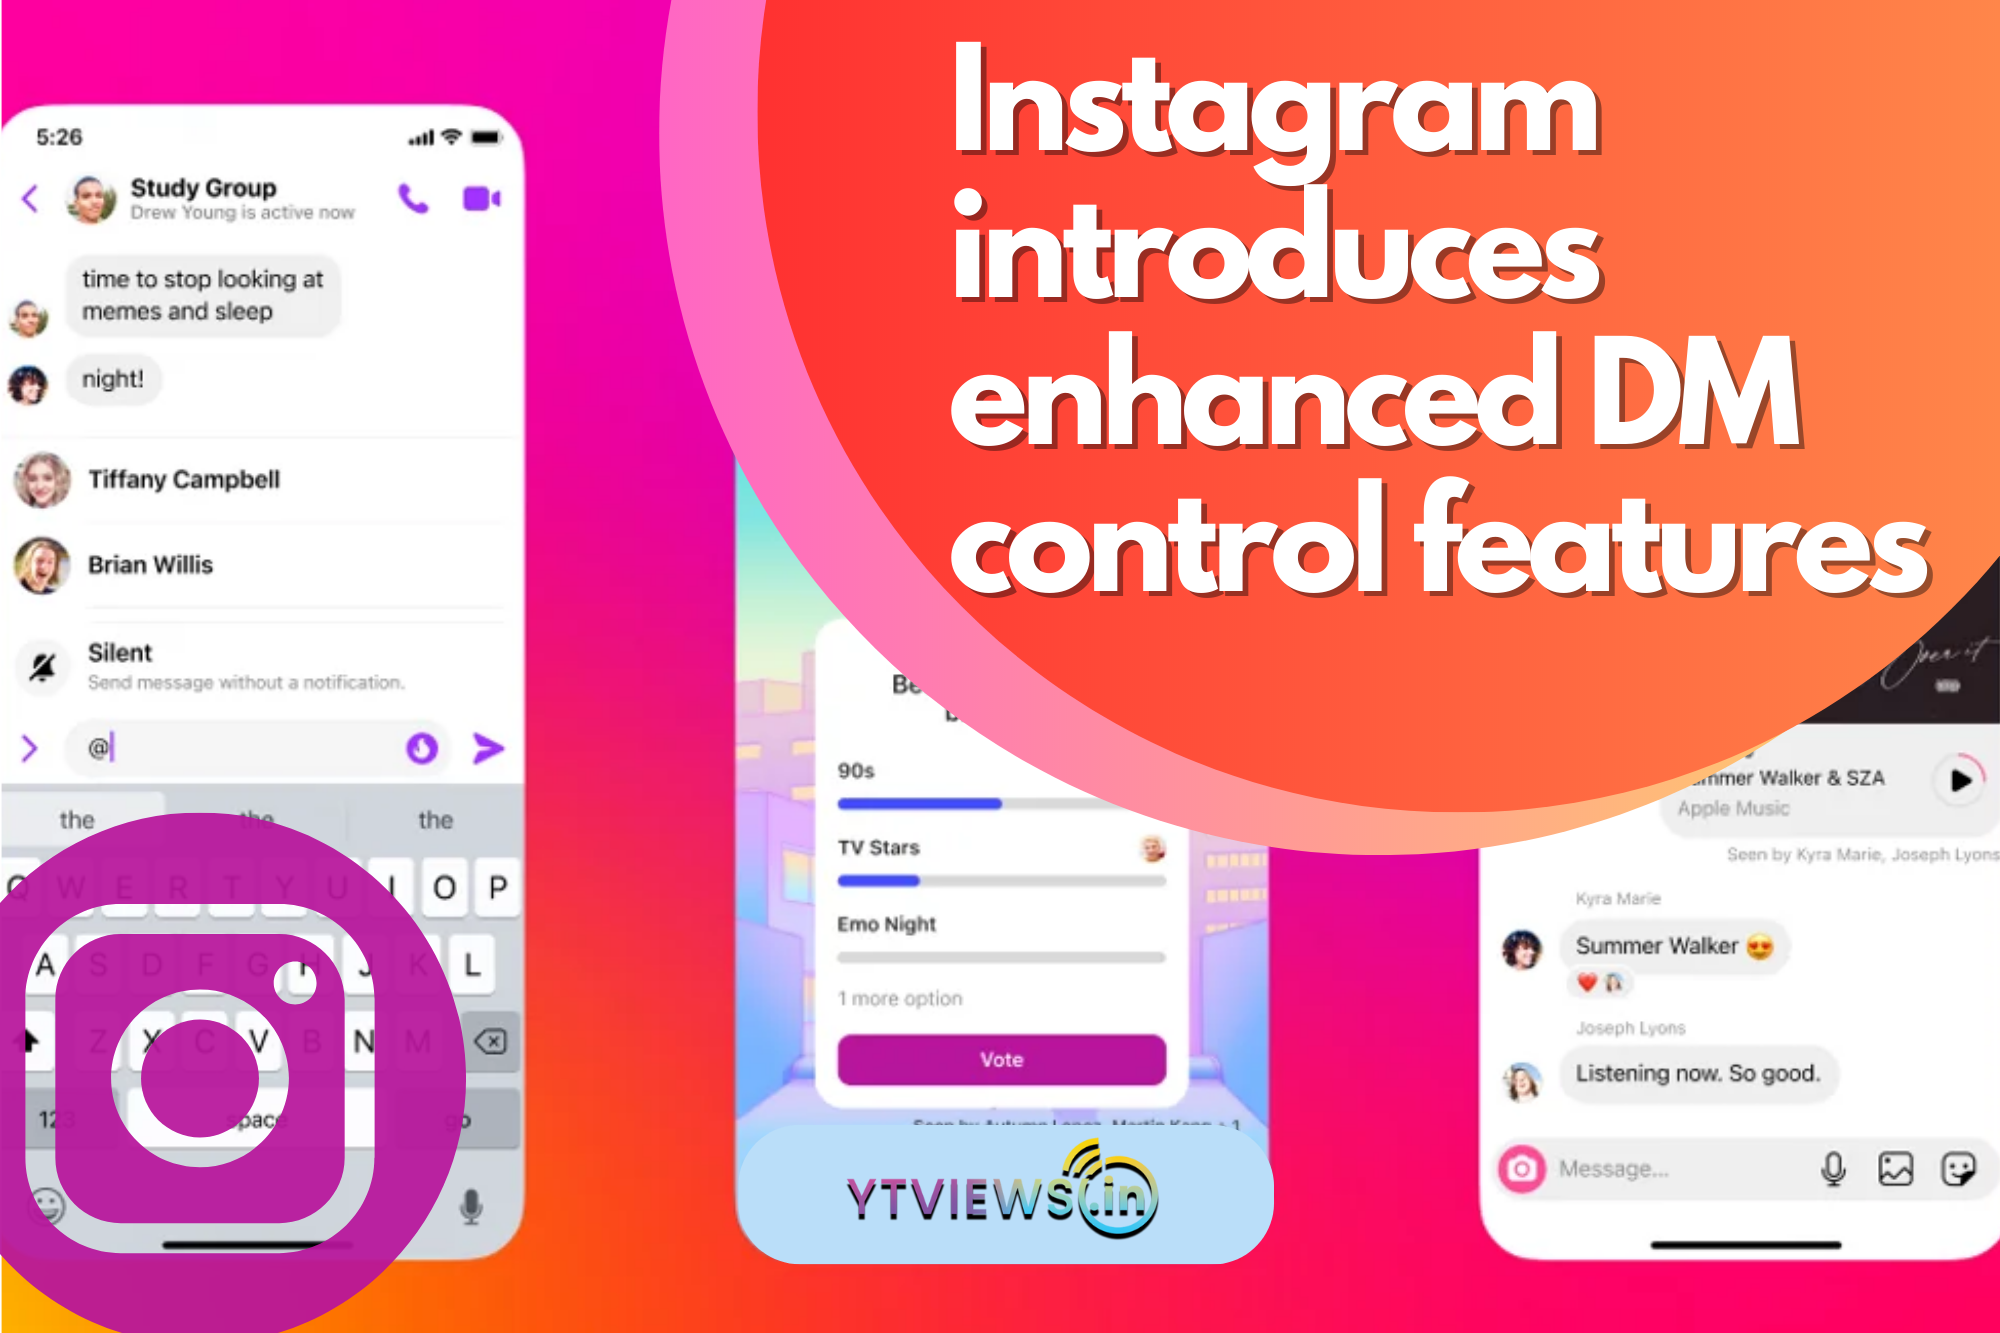 Instagram Introduces enhanced DM control features for users to prevent unwanted contact